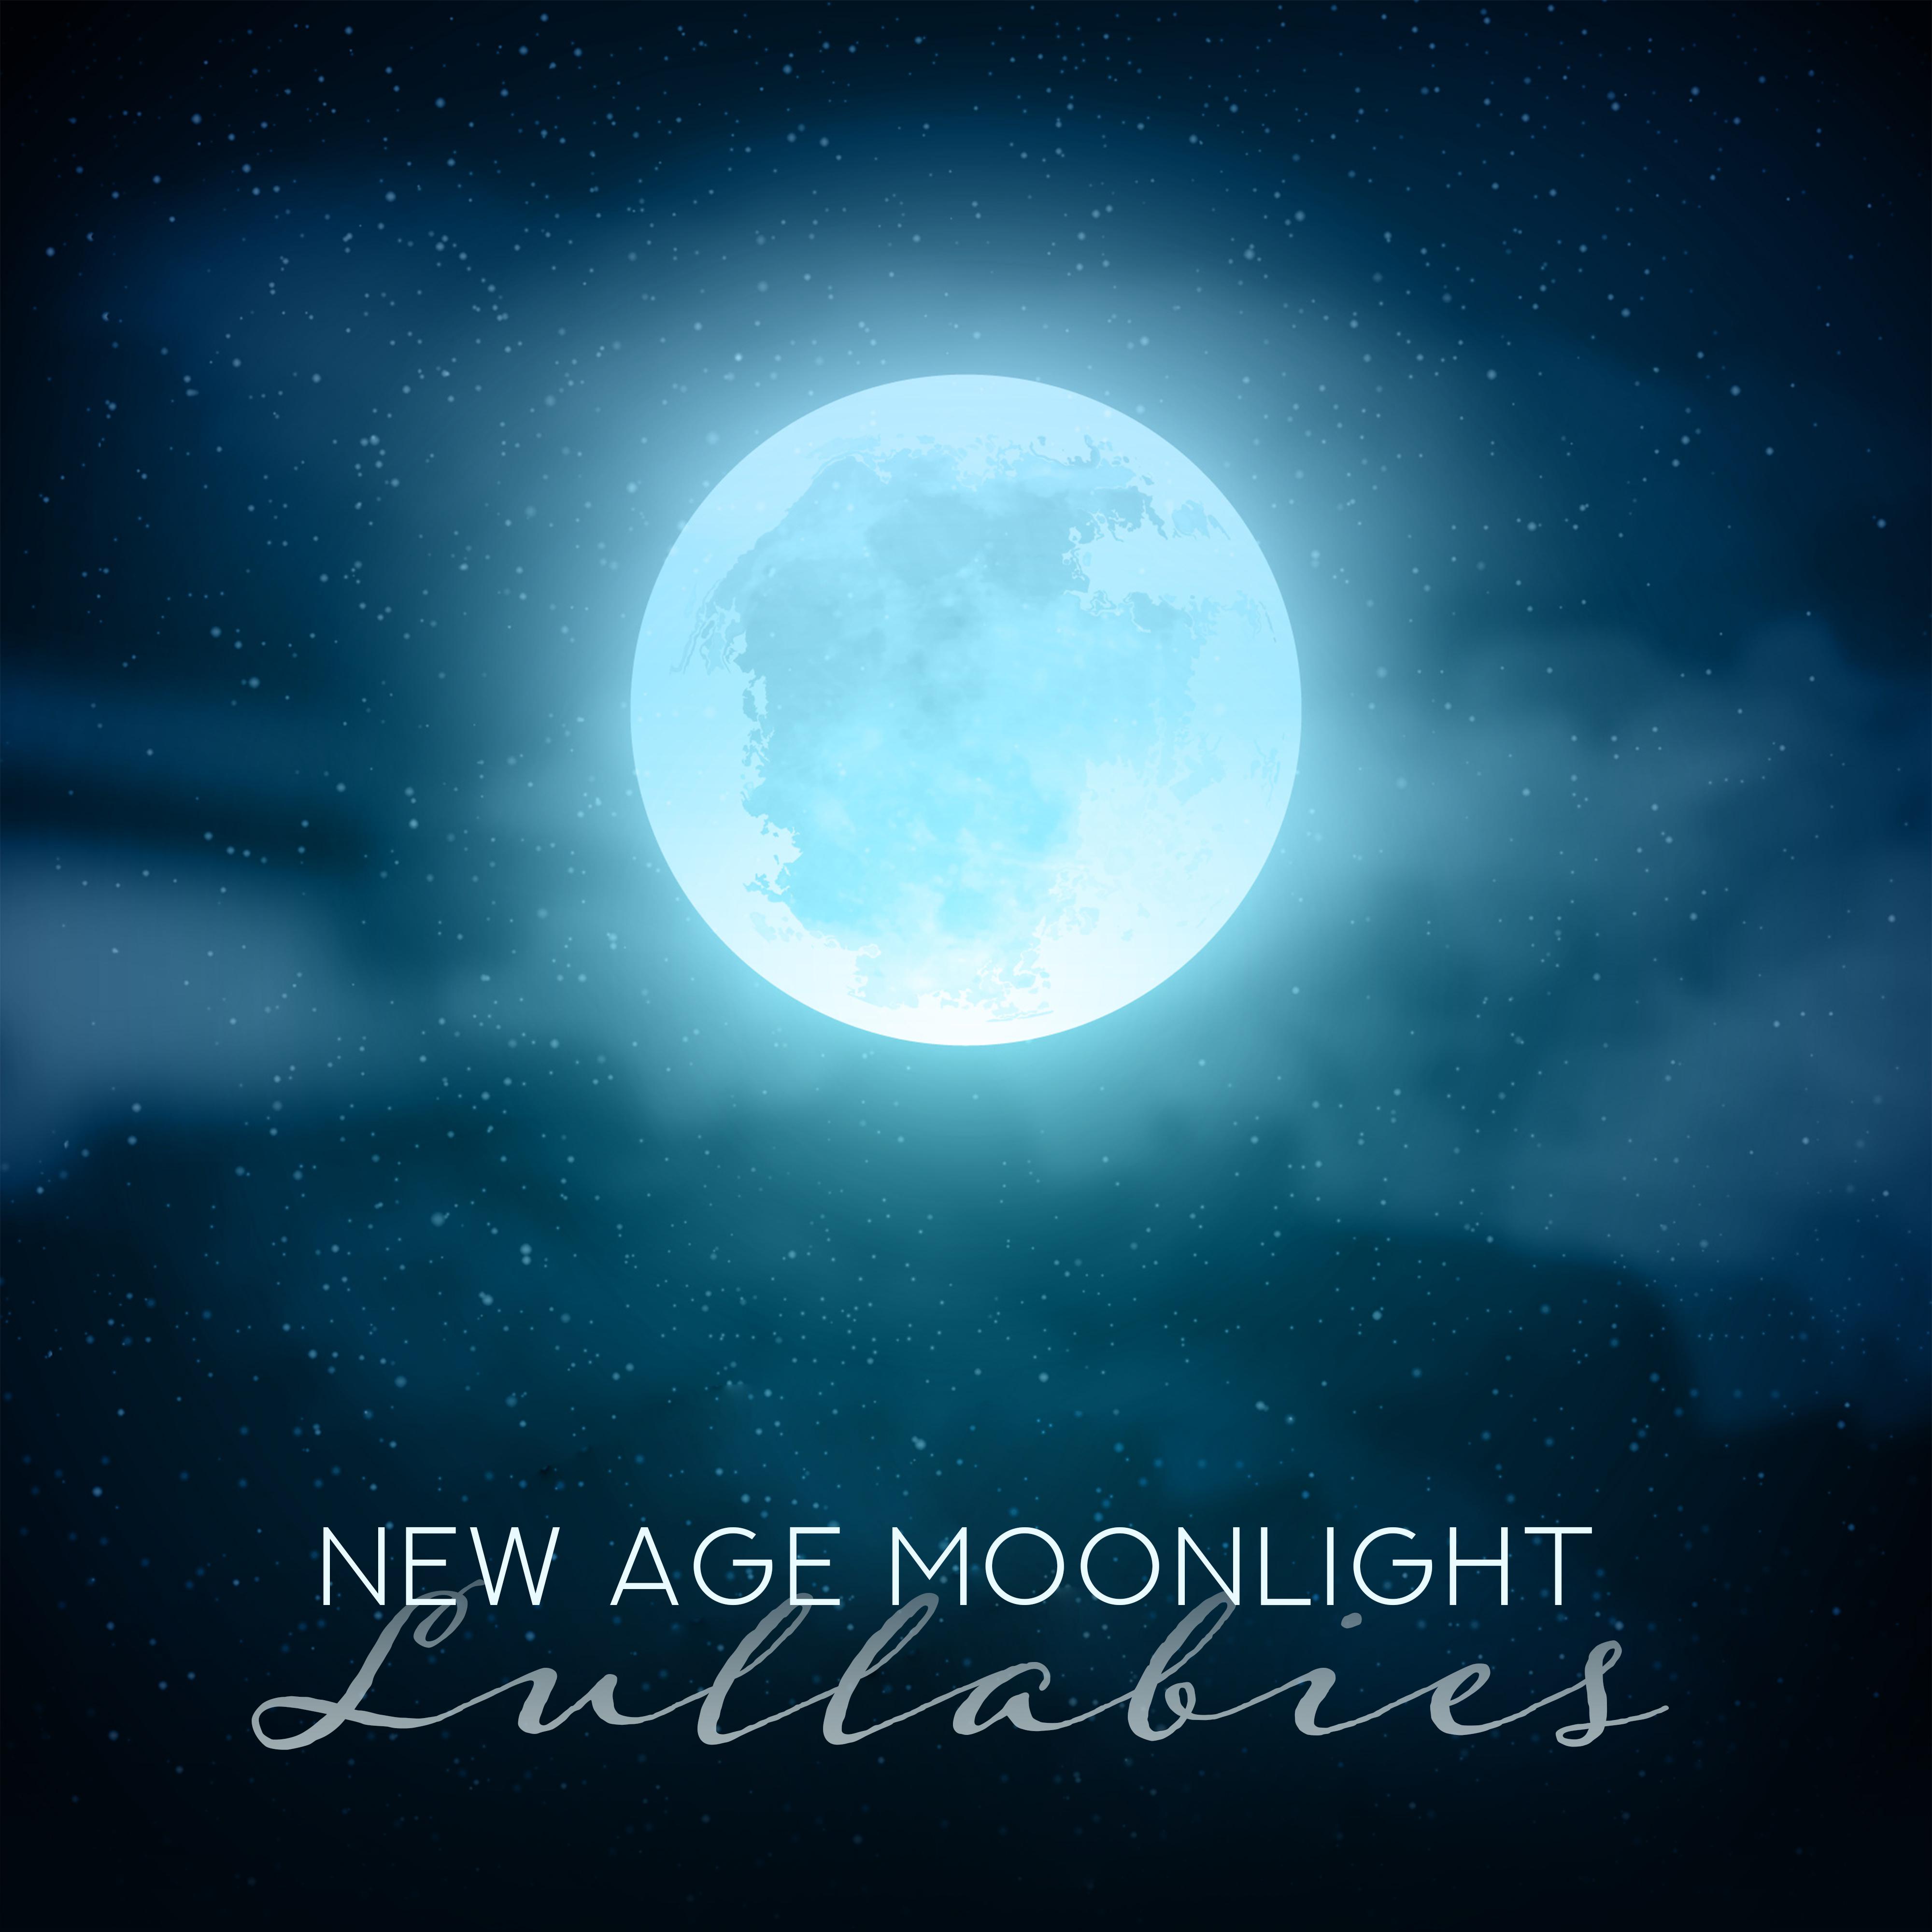 New Age Moonlight Lullabies: 2019 Deep Calming Music for Perfect Sleep, Stress Relief, Fight with Insomnia, Evening Relaxation, Full Rest After Long Day